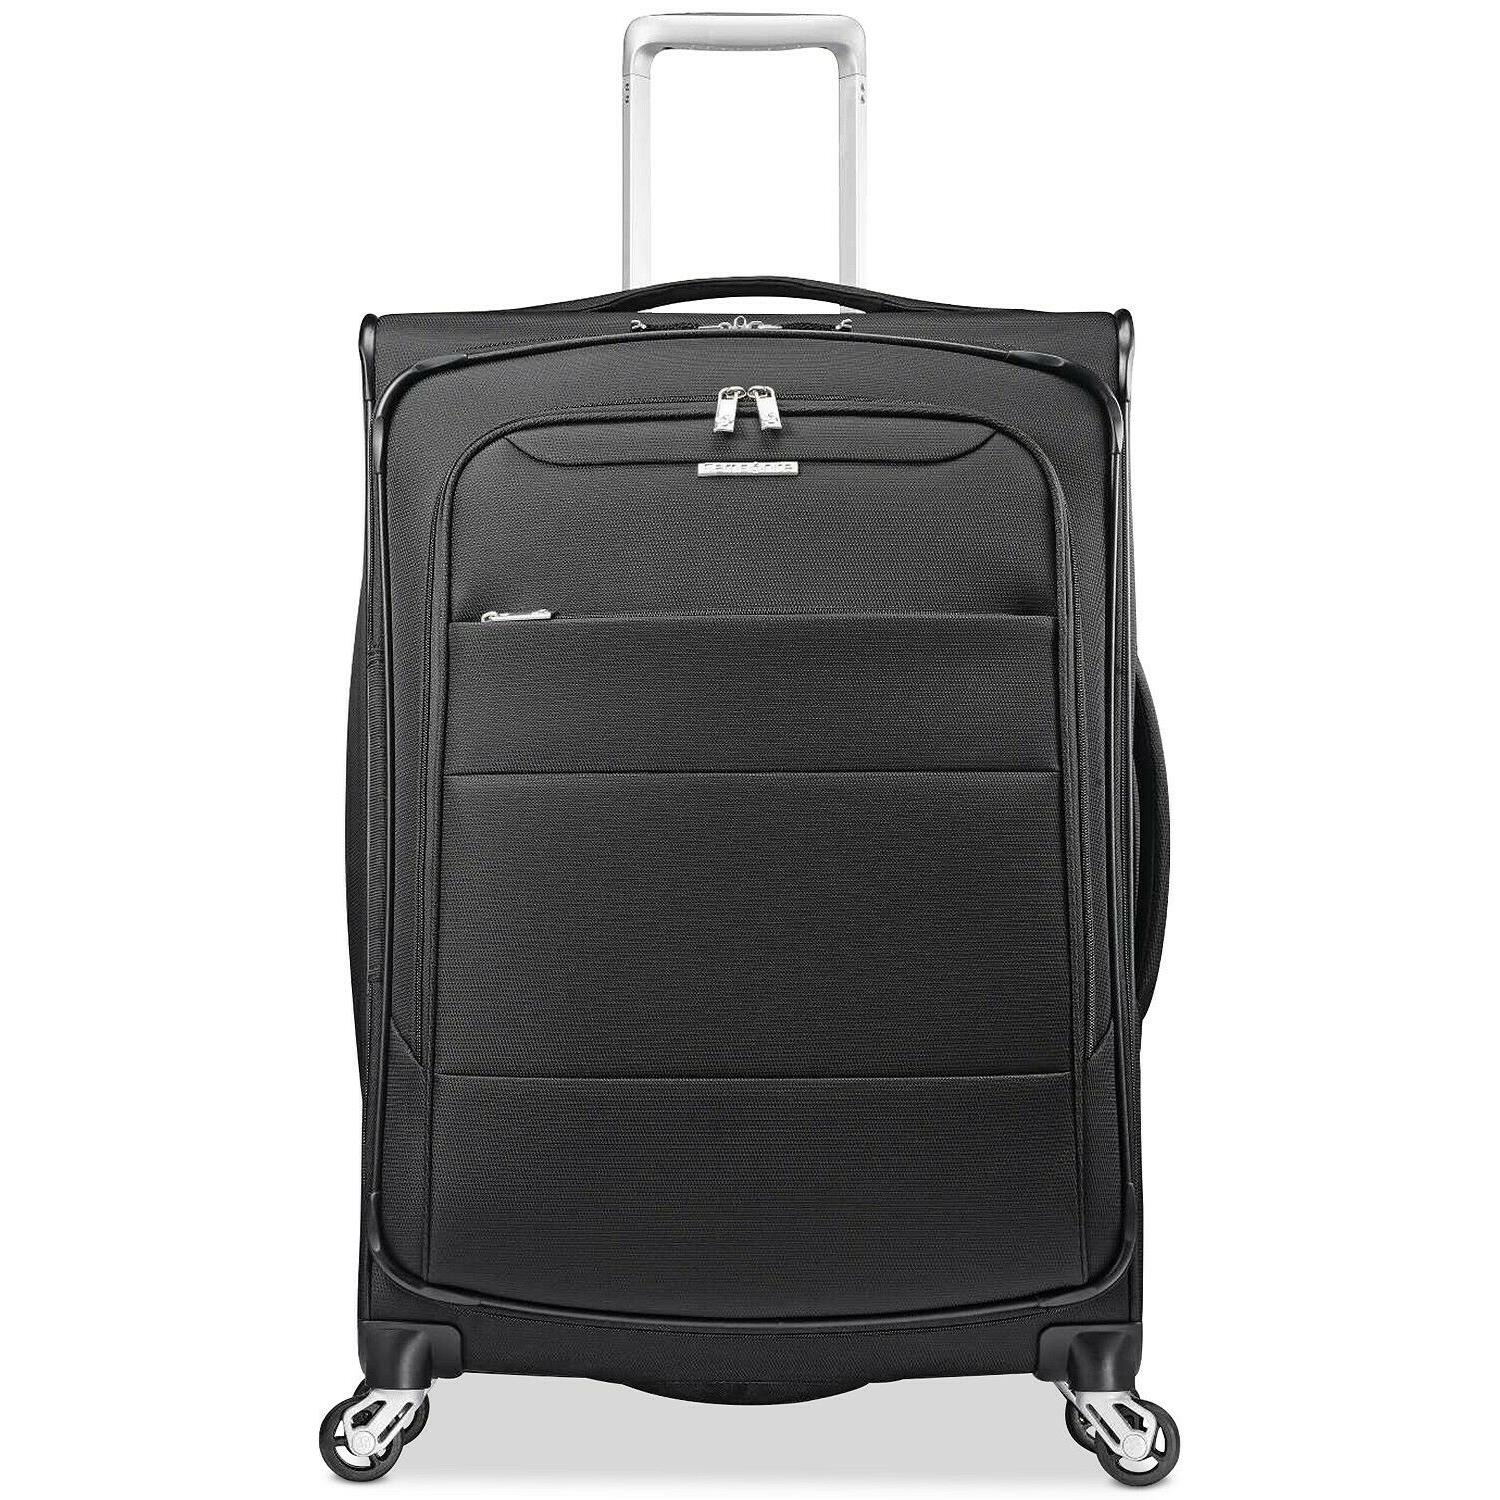 Samsonite Eco-spin 25 Expandable Softside Spinner Suitcase 5022